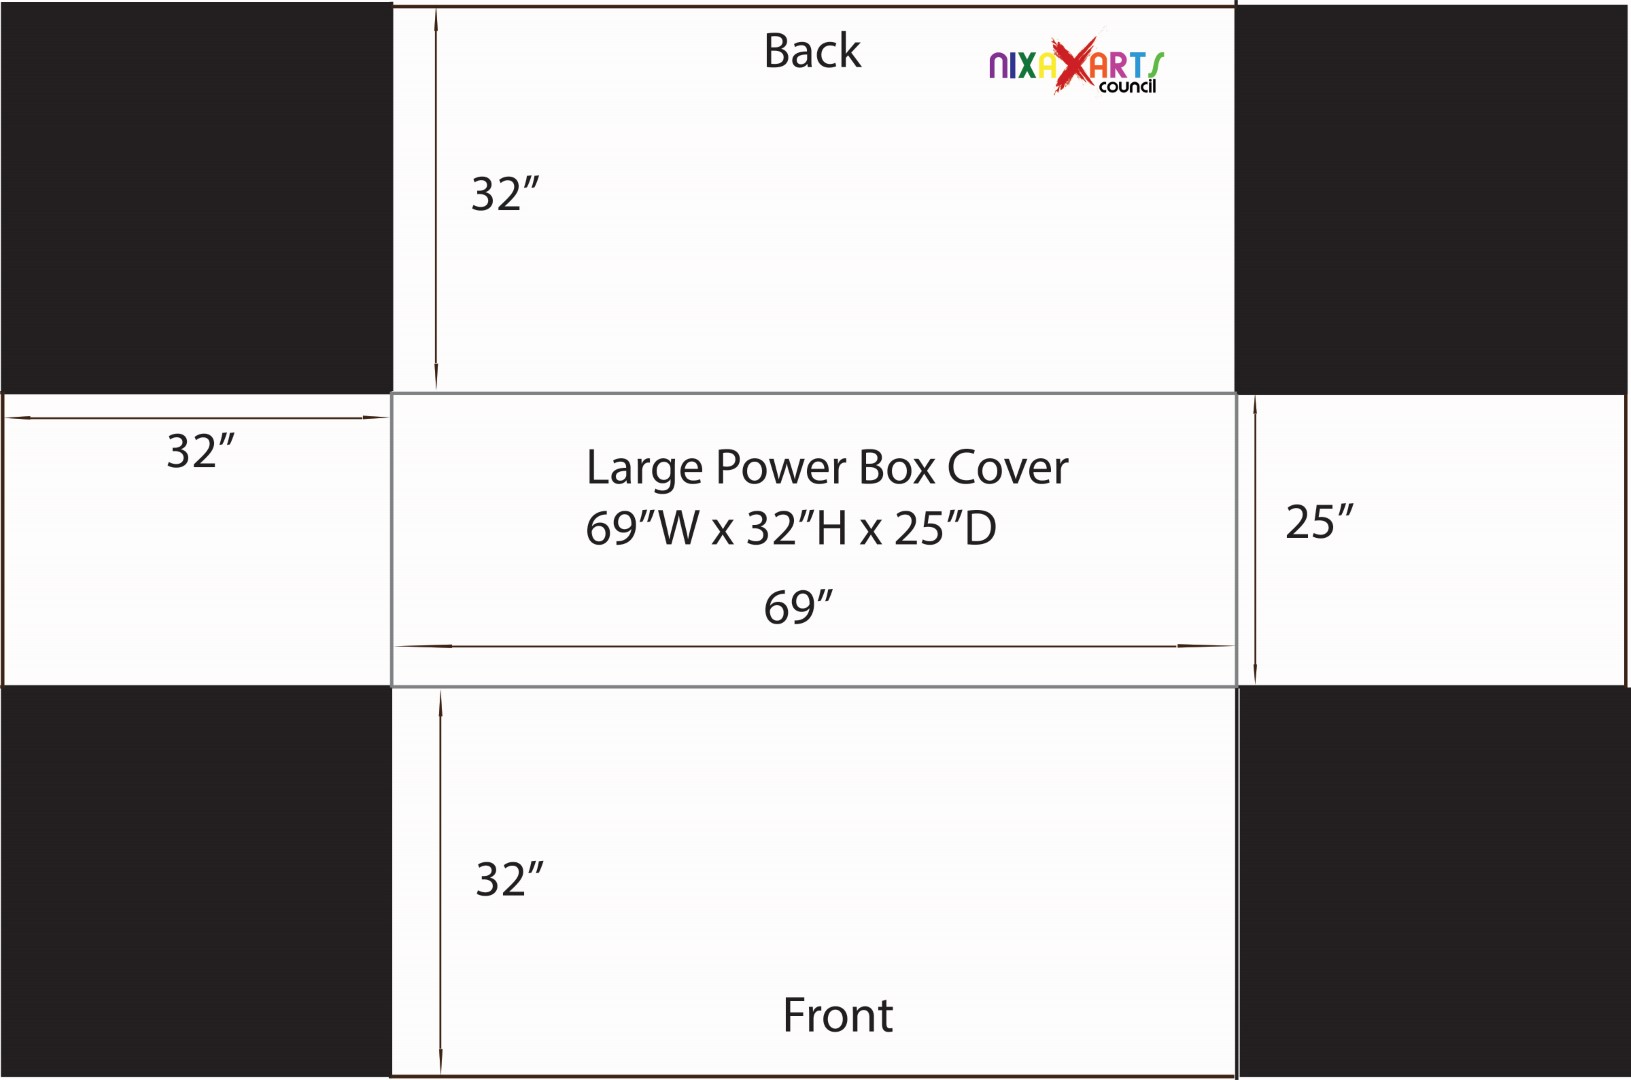 Large Power Box Cover Dimensions (Large)